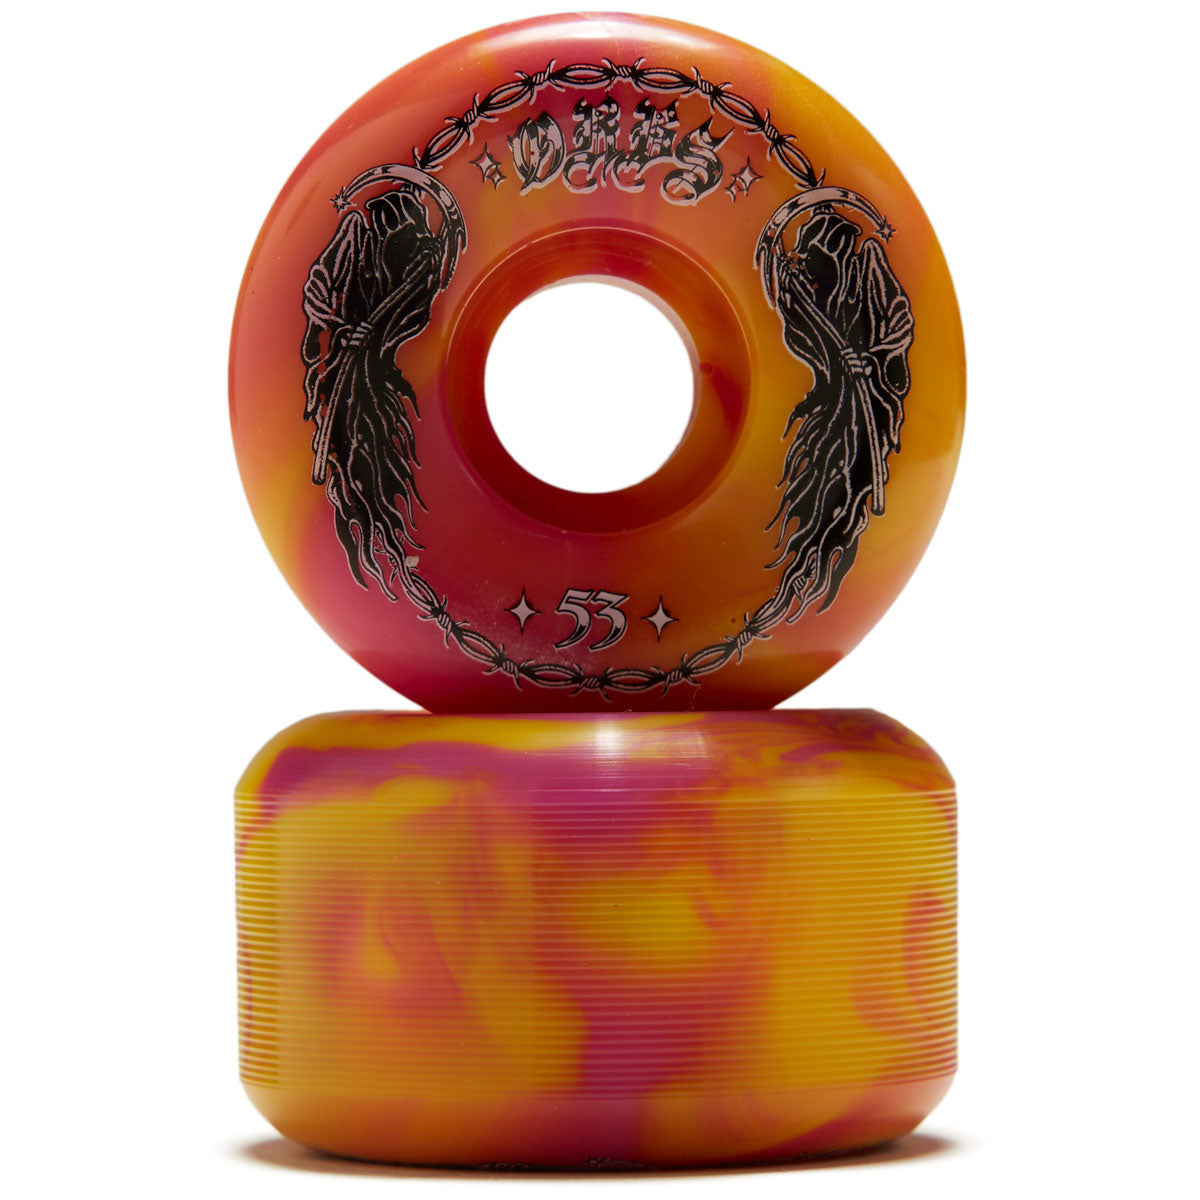 Welcome Orbs Specters '23 Conical 99A Skateboard Wheels - Pink/Yellow Swirl - 53mm image 2